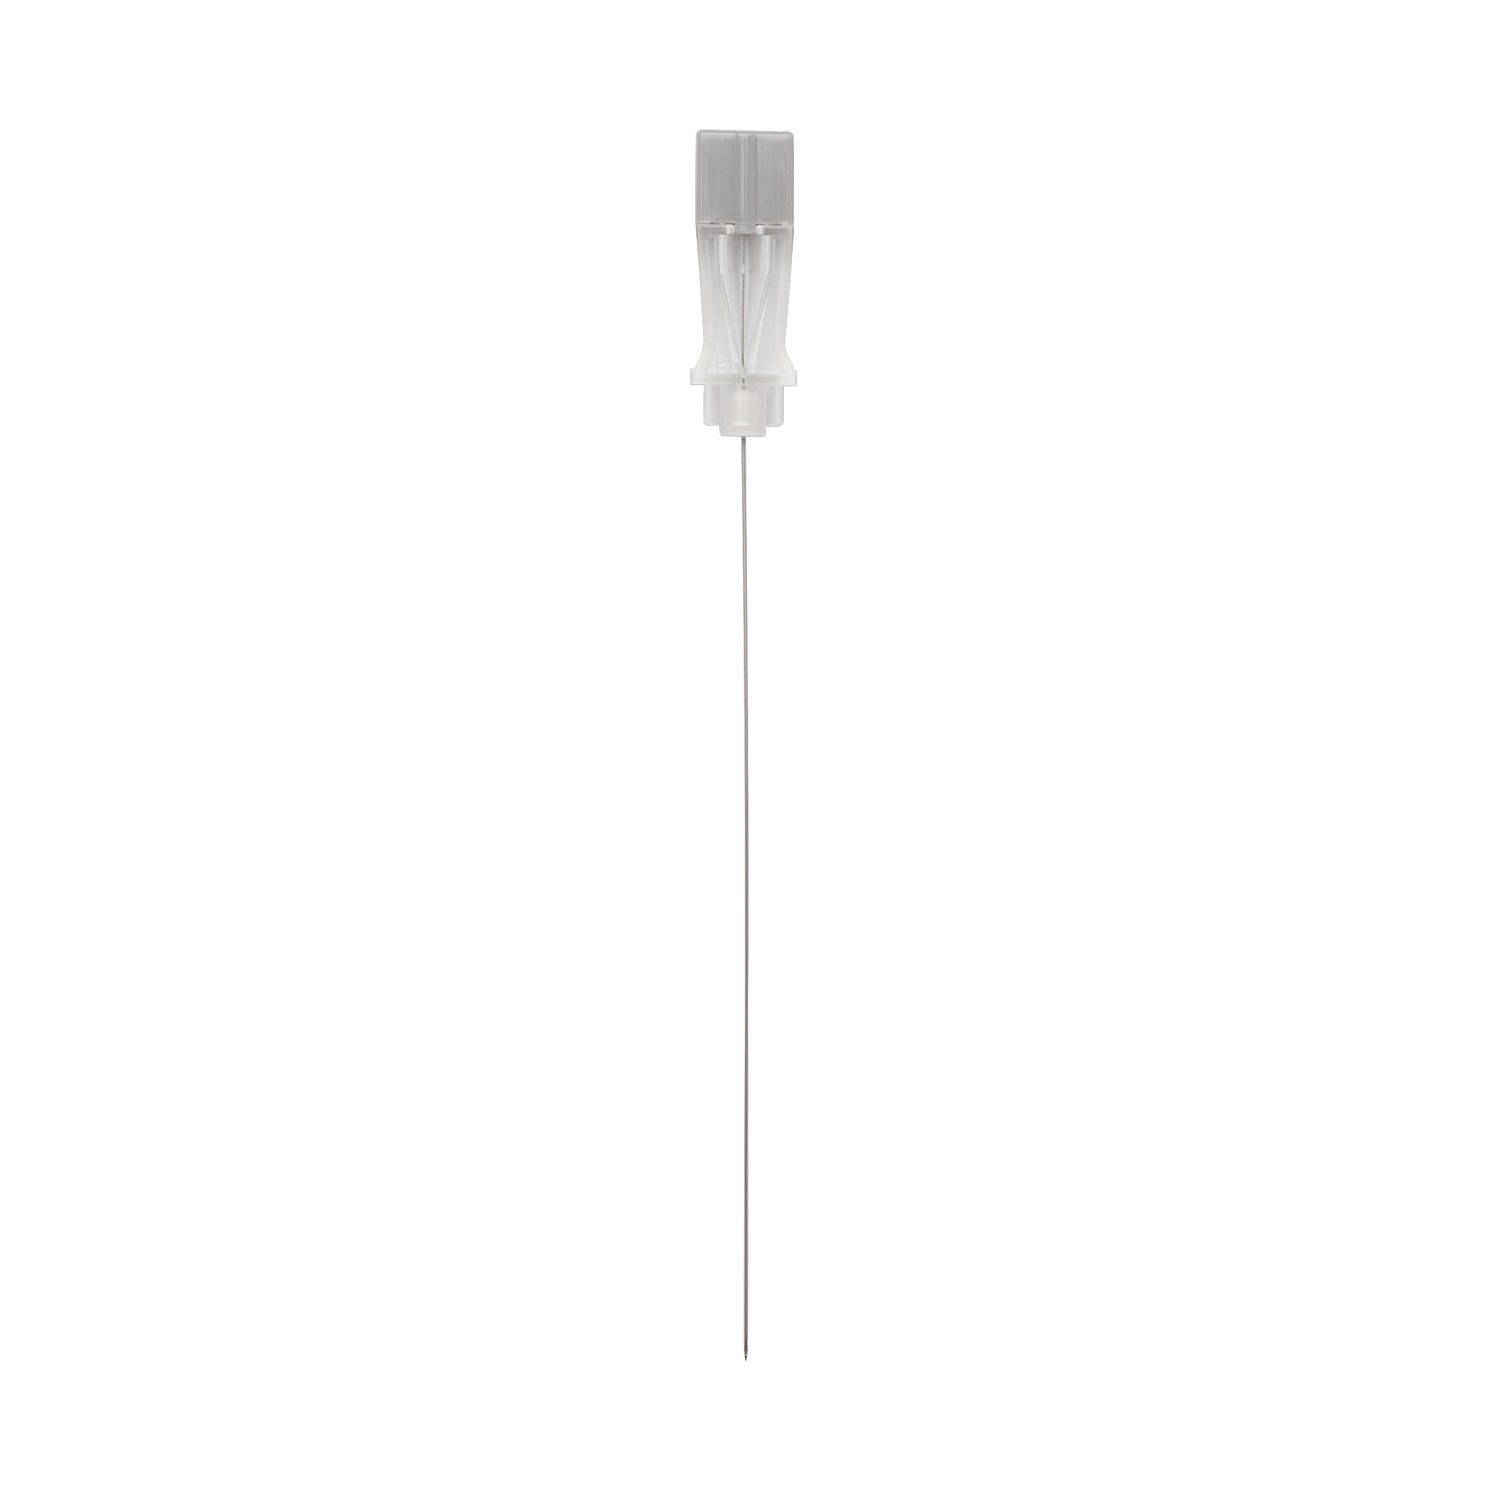 MYCO RELI PENCIL POINT SPINAL NEEDLES : PP27G351 BX                       $130.78 Stocked